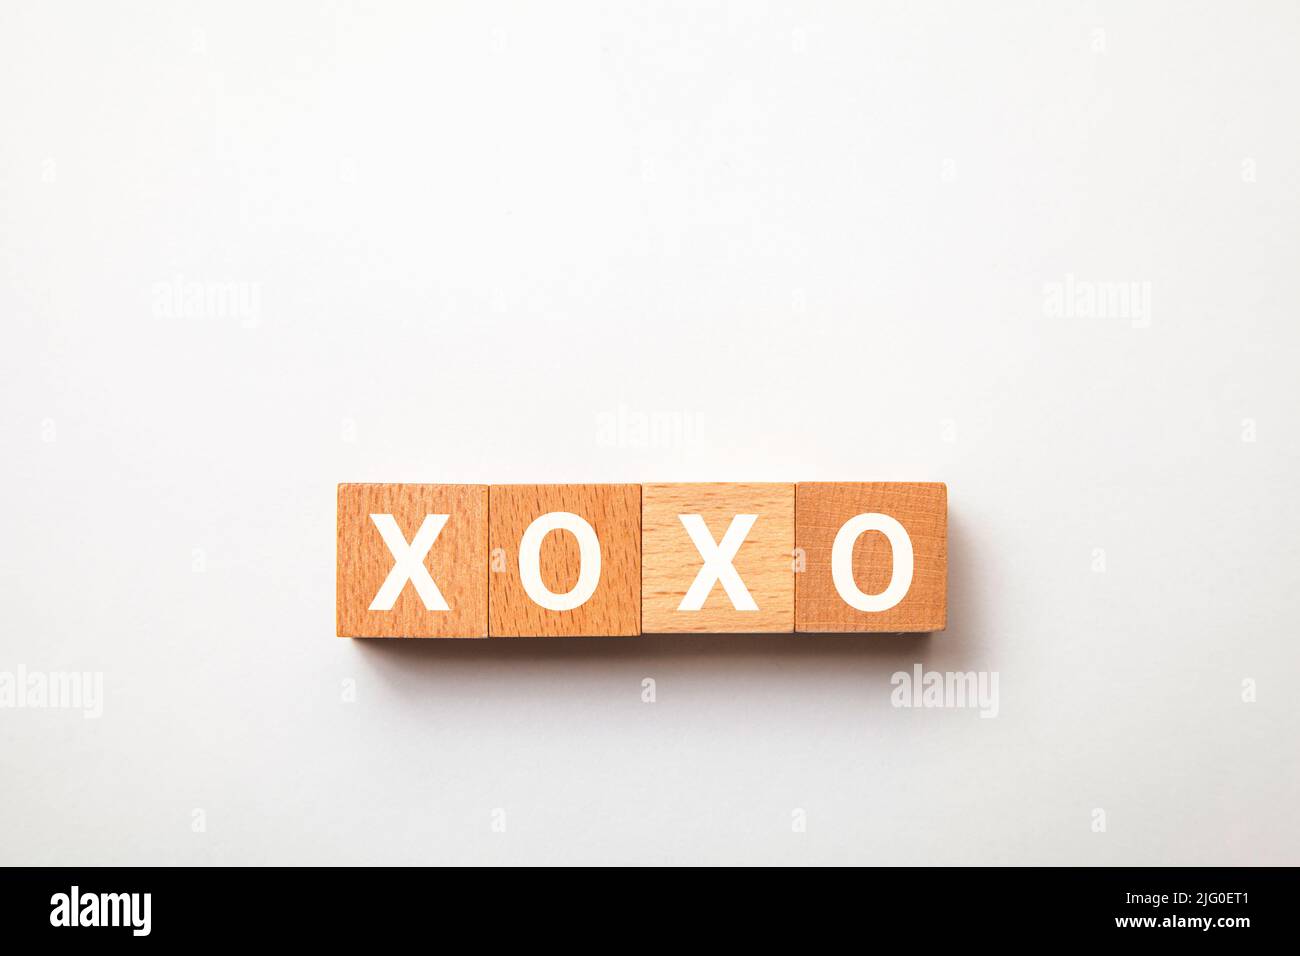 The character of xoxo. Hugs and kisses. Affection expression. Written on four wooden blocks. White letters. White background. Stock Photo